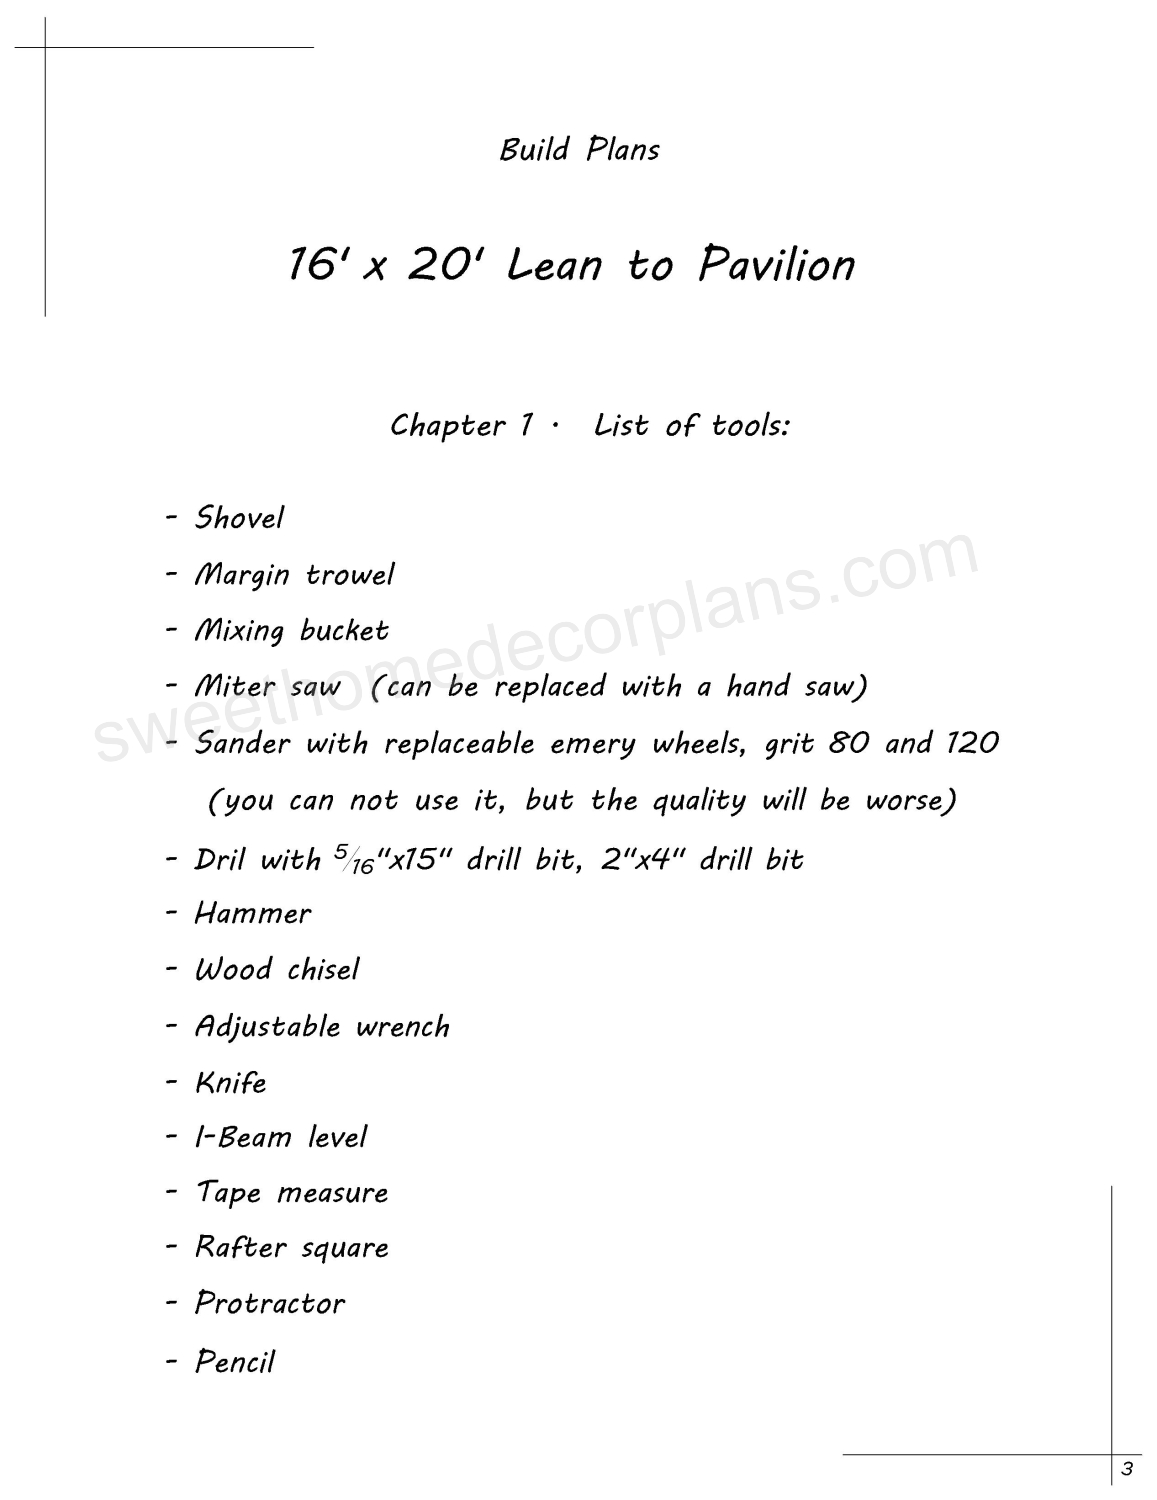 list-of-tools-16-x-20-lean-to-pavilion-plans-in-pdf